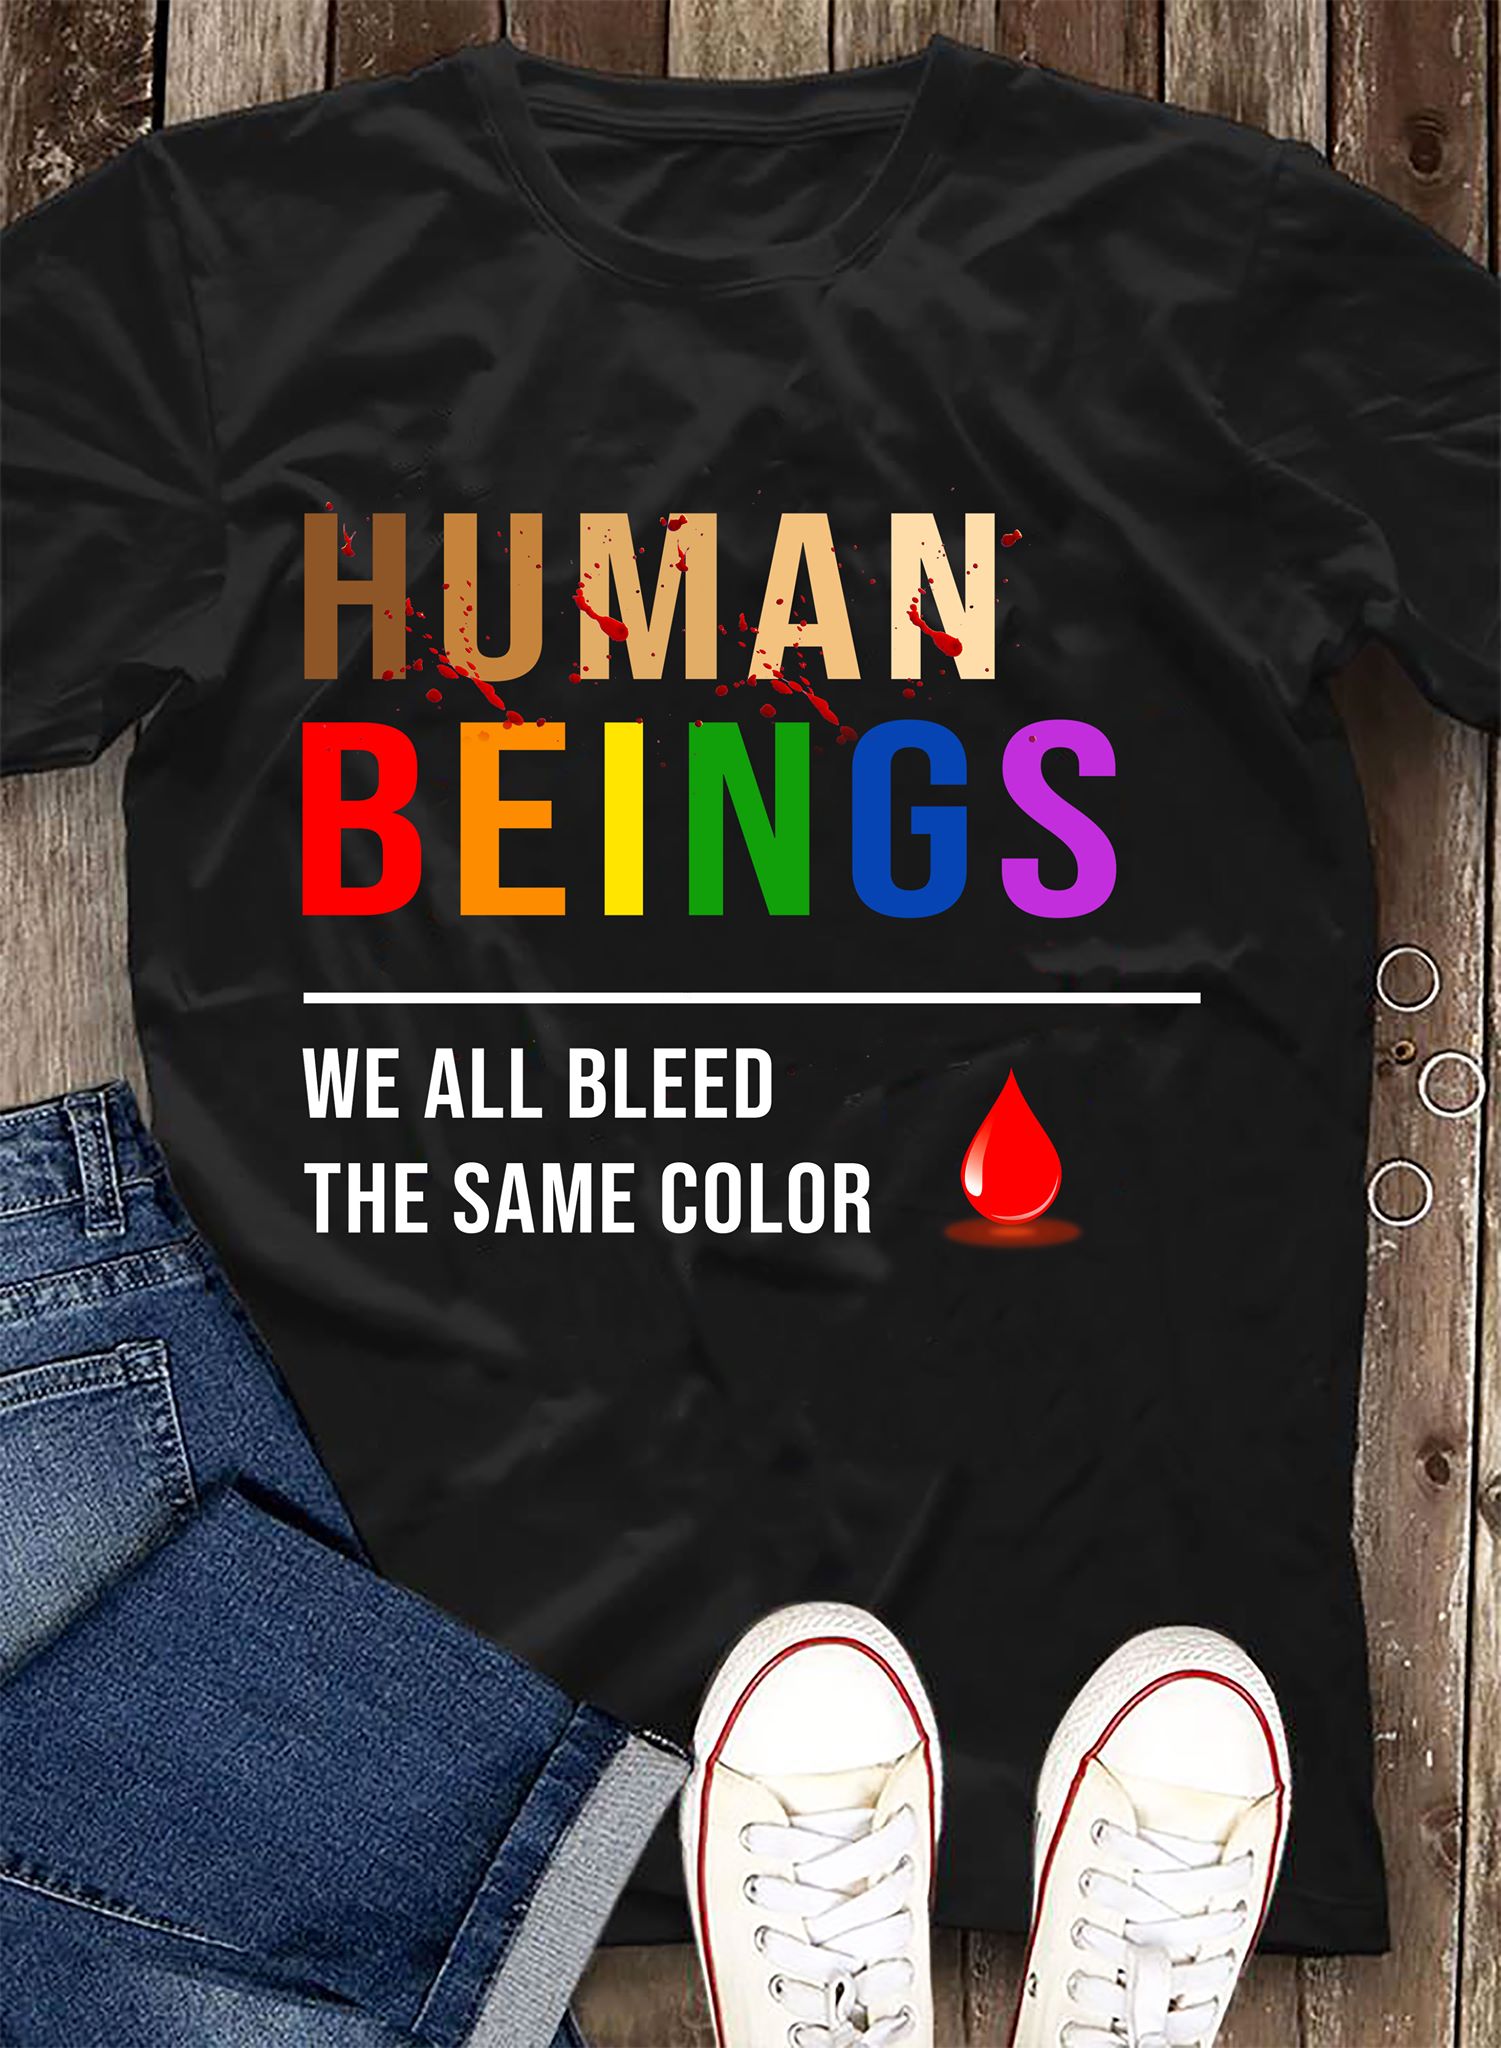 Human beings we all need the color - Black community, lgbt community